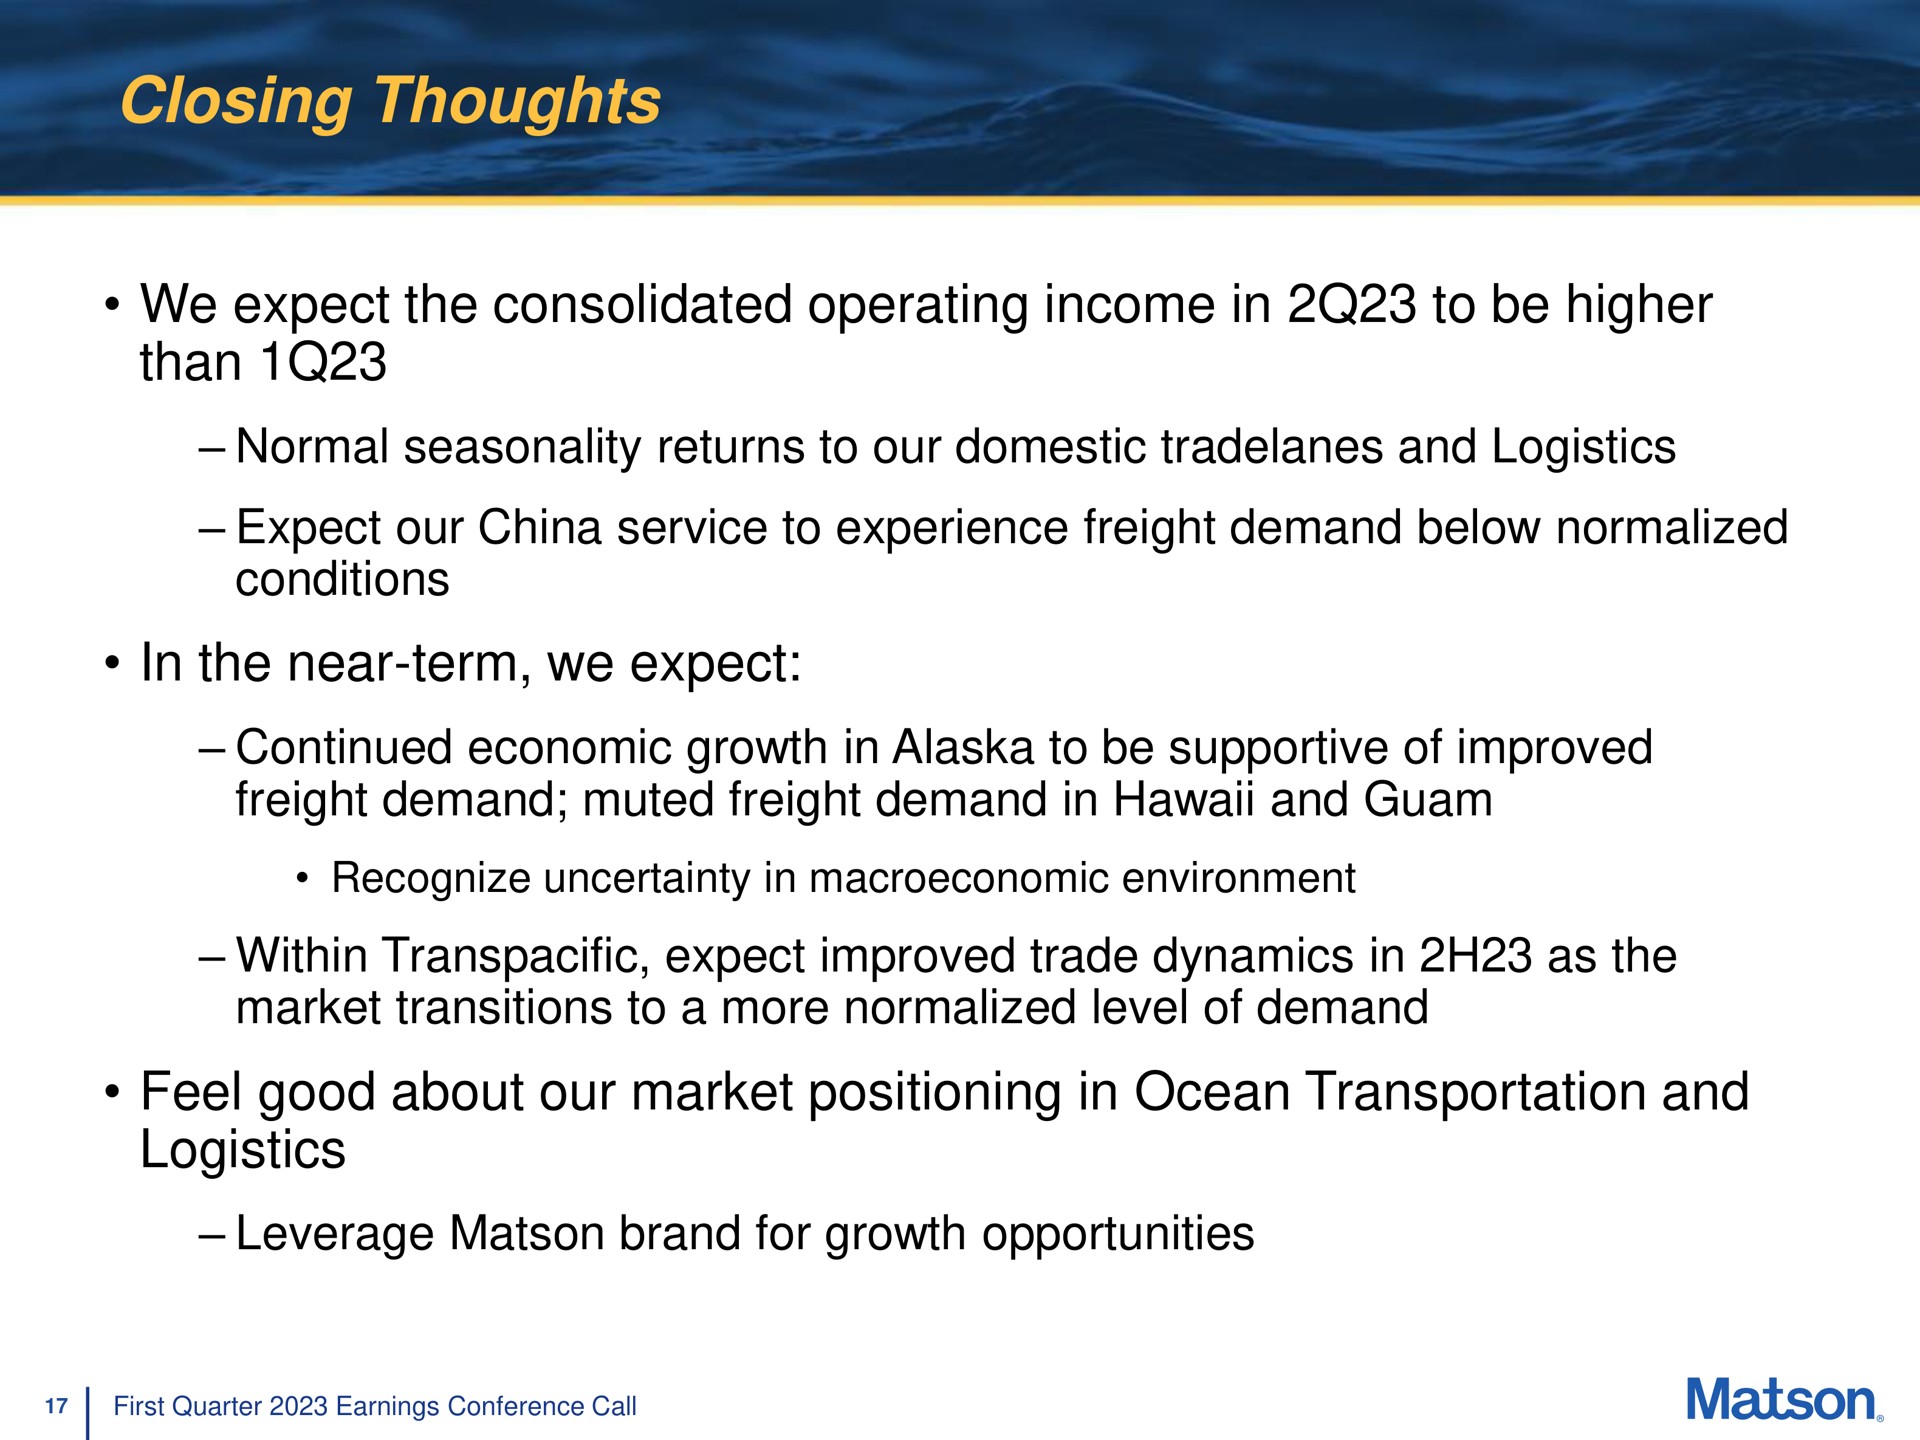 closing thoughts we expect the consolidated operating income in to be higher than normal seasonality returns to our domestic and logistics expect our china service to experience freight demand below normalized conditions in the near term we expect continued economic growth in to be supportive of improved freight demand muted freight demand in and within transpacific expect improved trade dynamics in as the market transitions to a more normalized level of demand feel good about our market positioning in ocean transportation and logistics leverage brand for growth opportunities | Matson